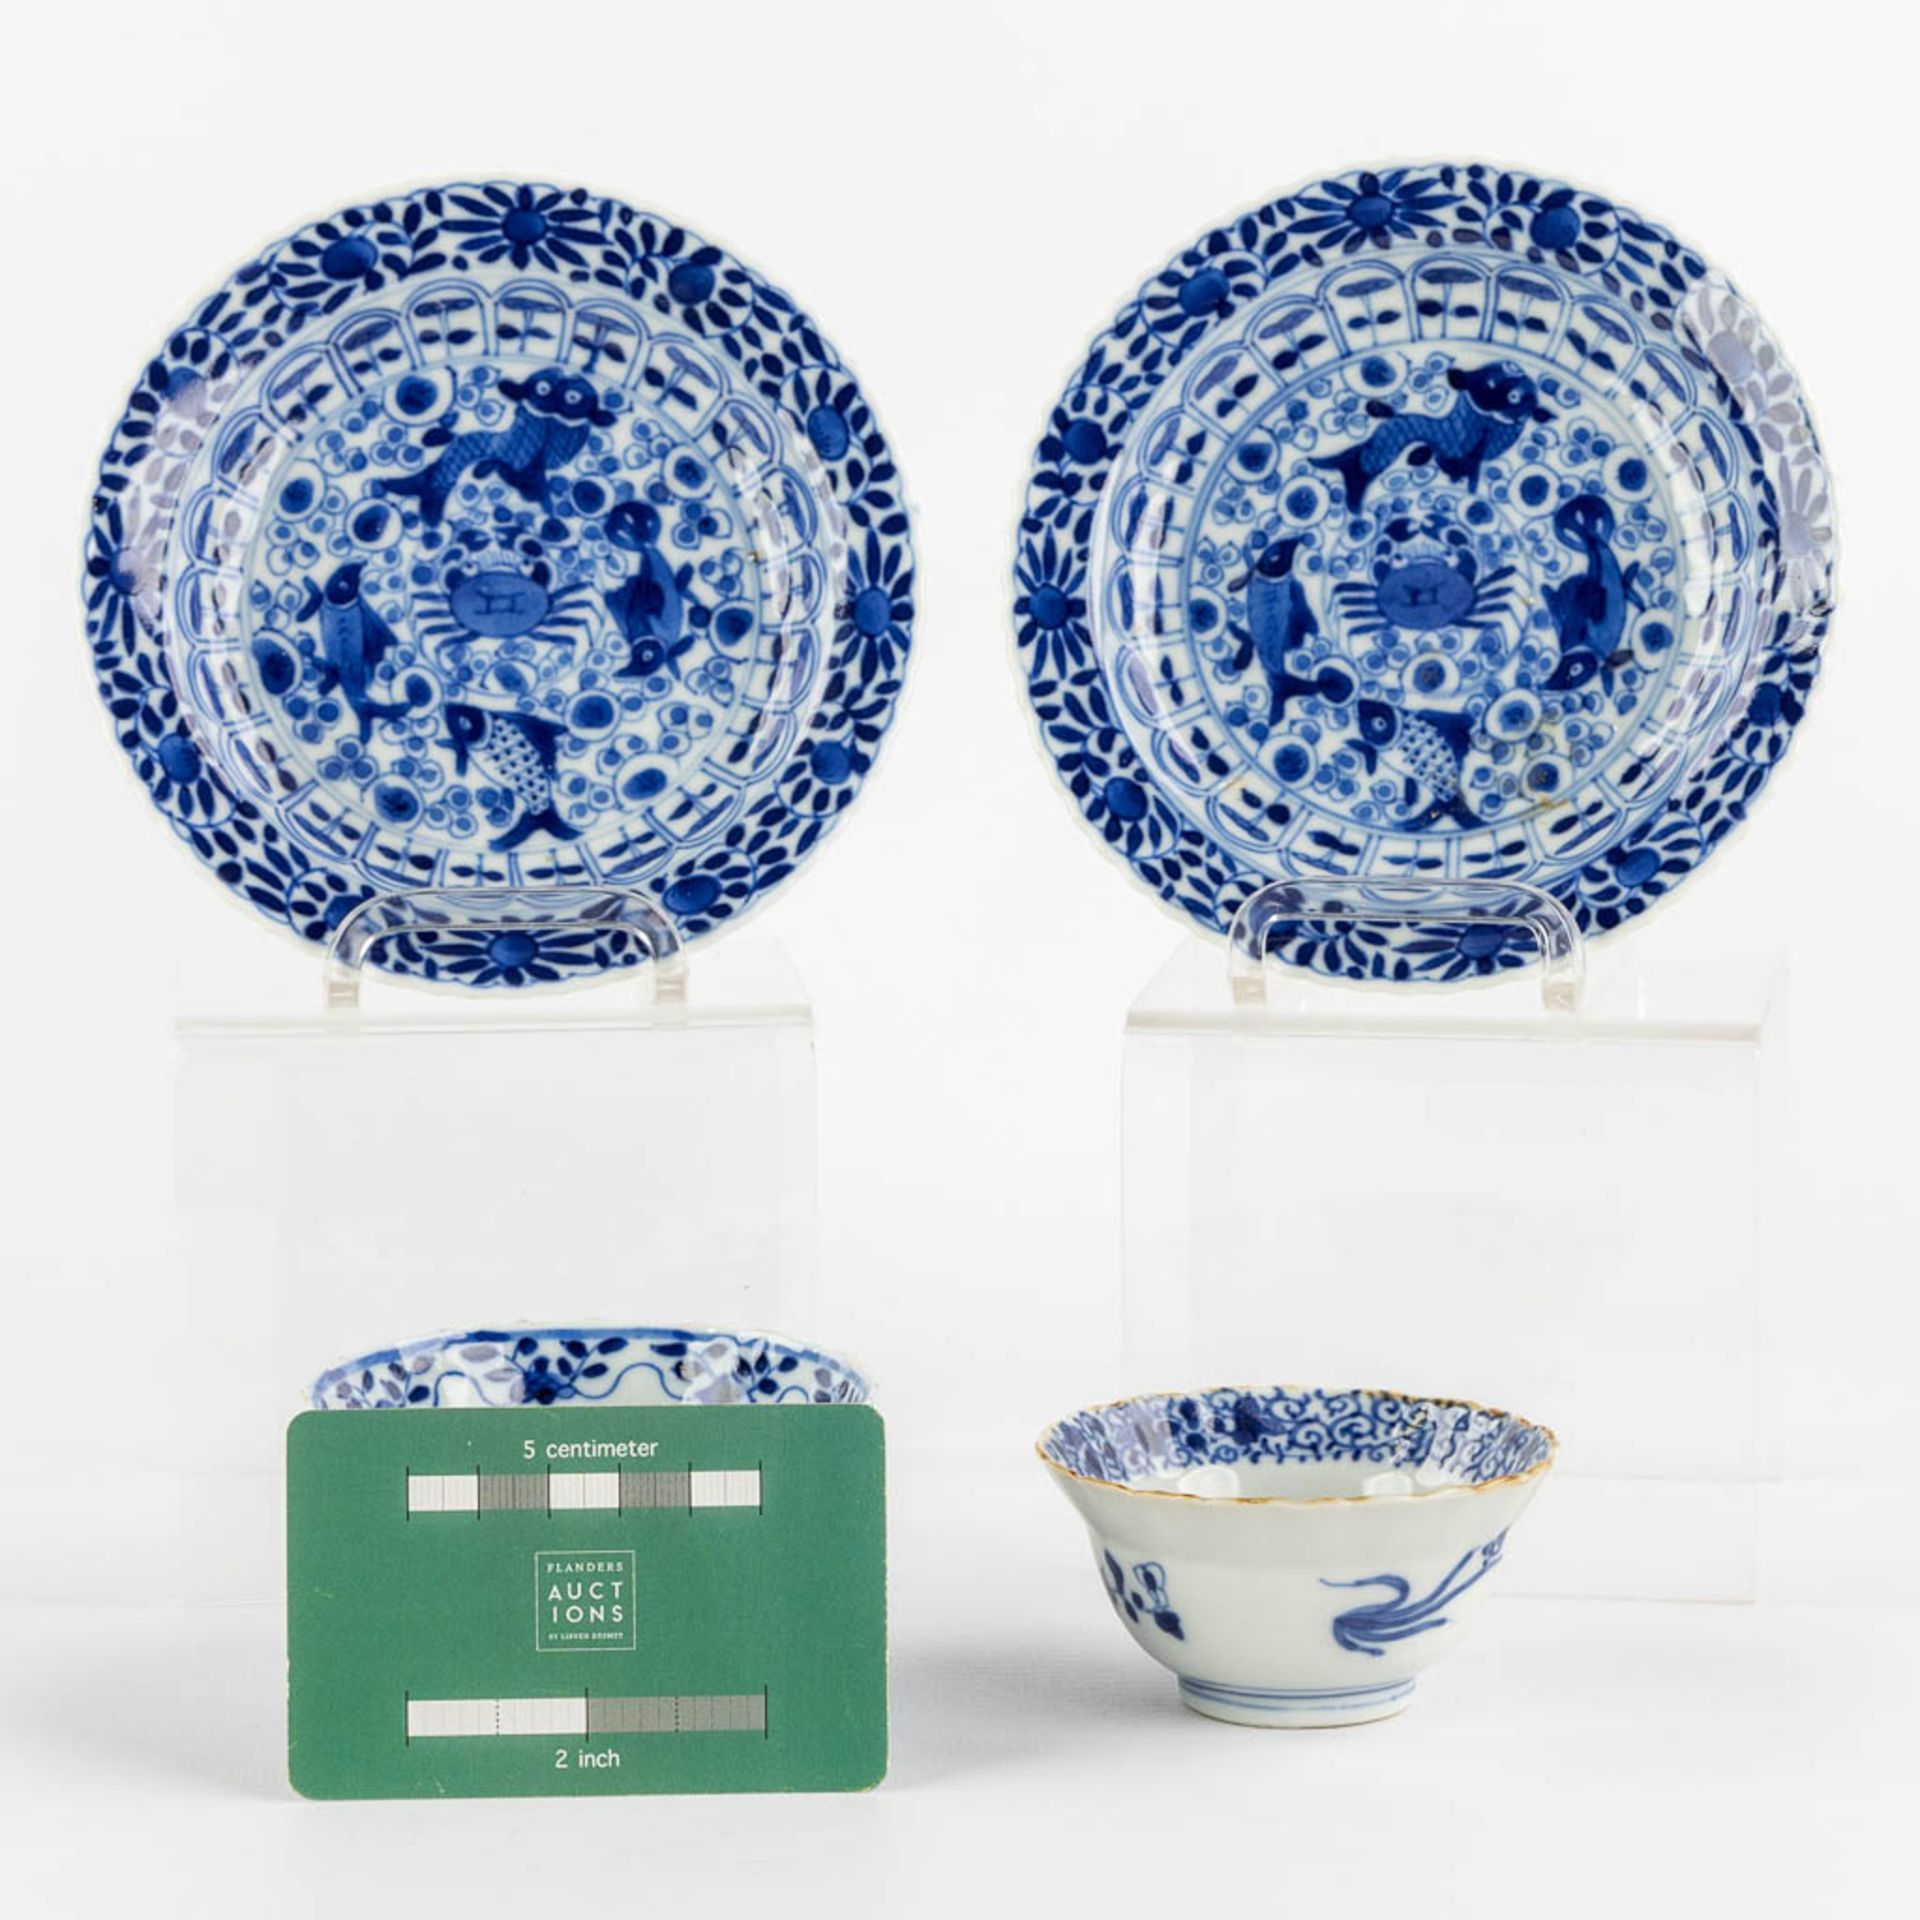 A pair of Chinese plate, blue-white decor of 'Fish and Crab', 19th C. (D:13,5 cm) - Image 2 of 9